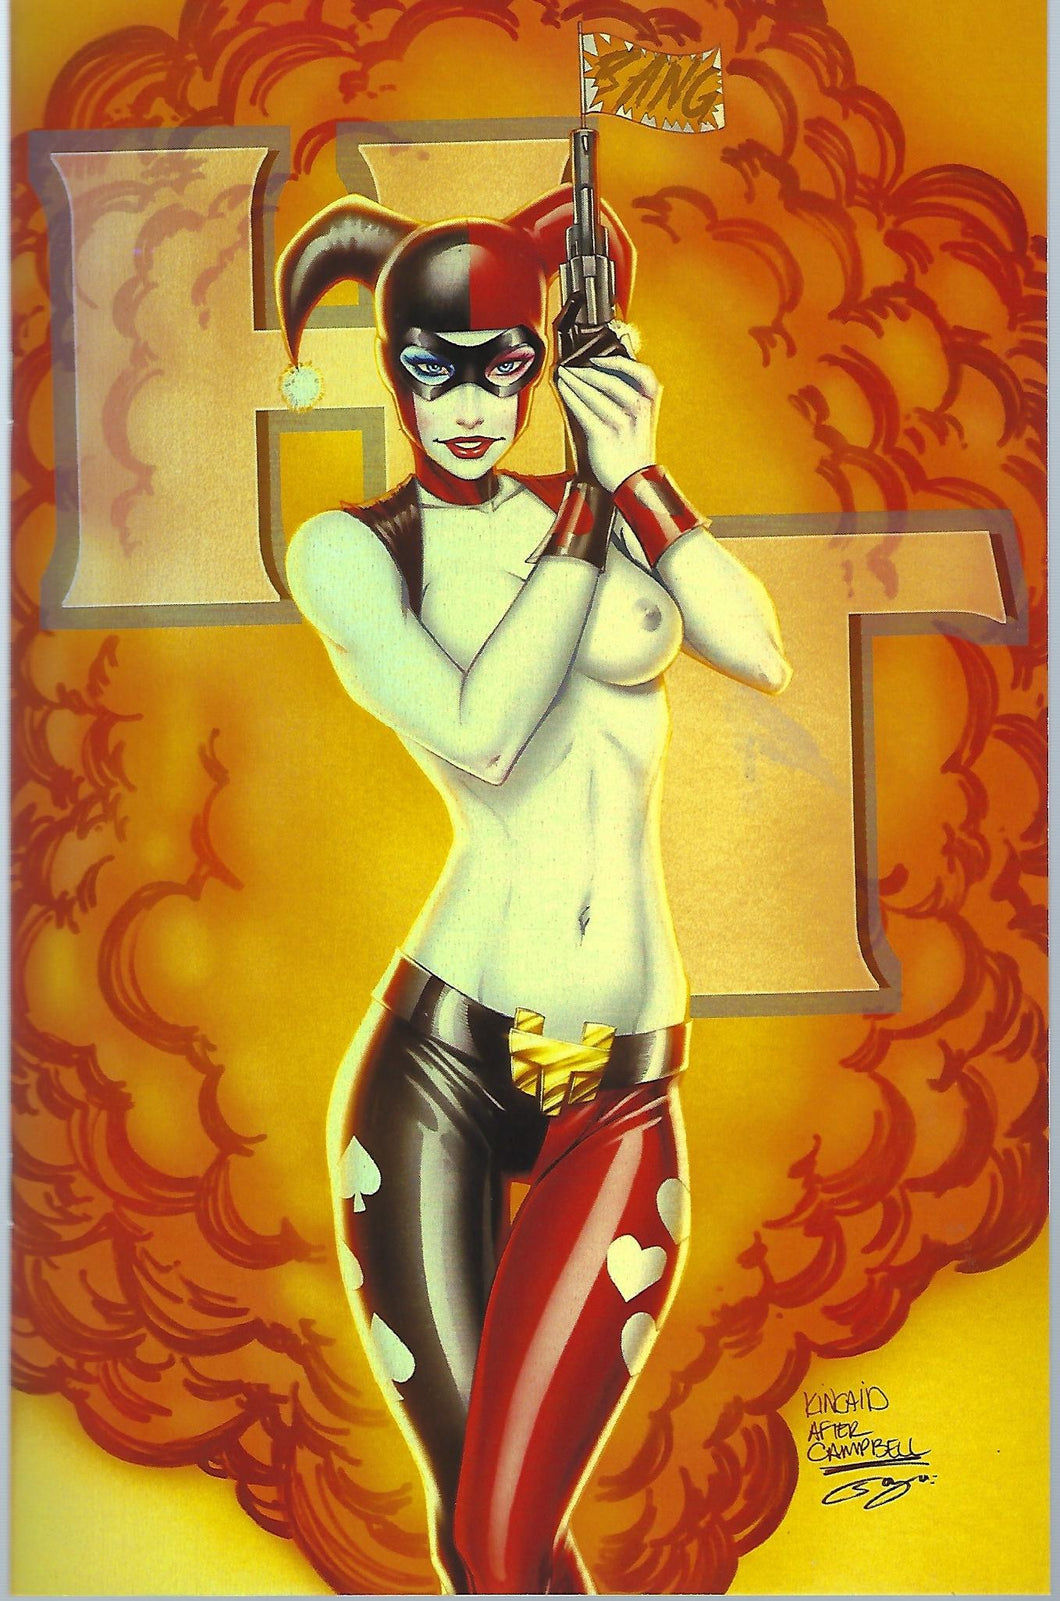 Hardlee Thinn Jay4LisaComics.com Exclusive Chrome Topless Cover by Ryan Kincaid LIMITED TO ONLY 20 NM